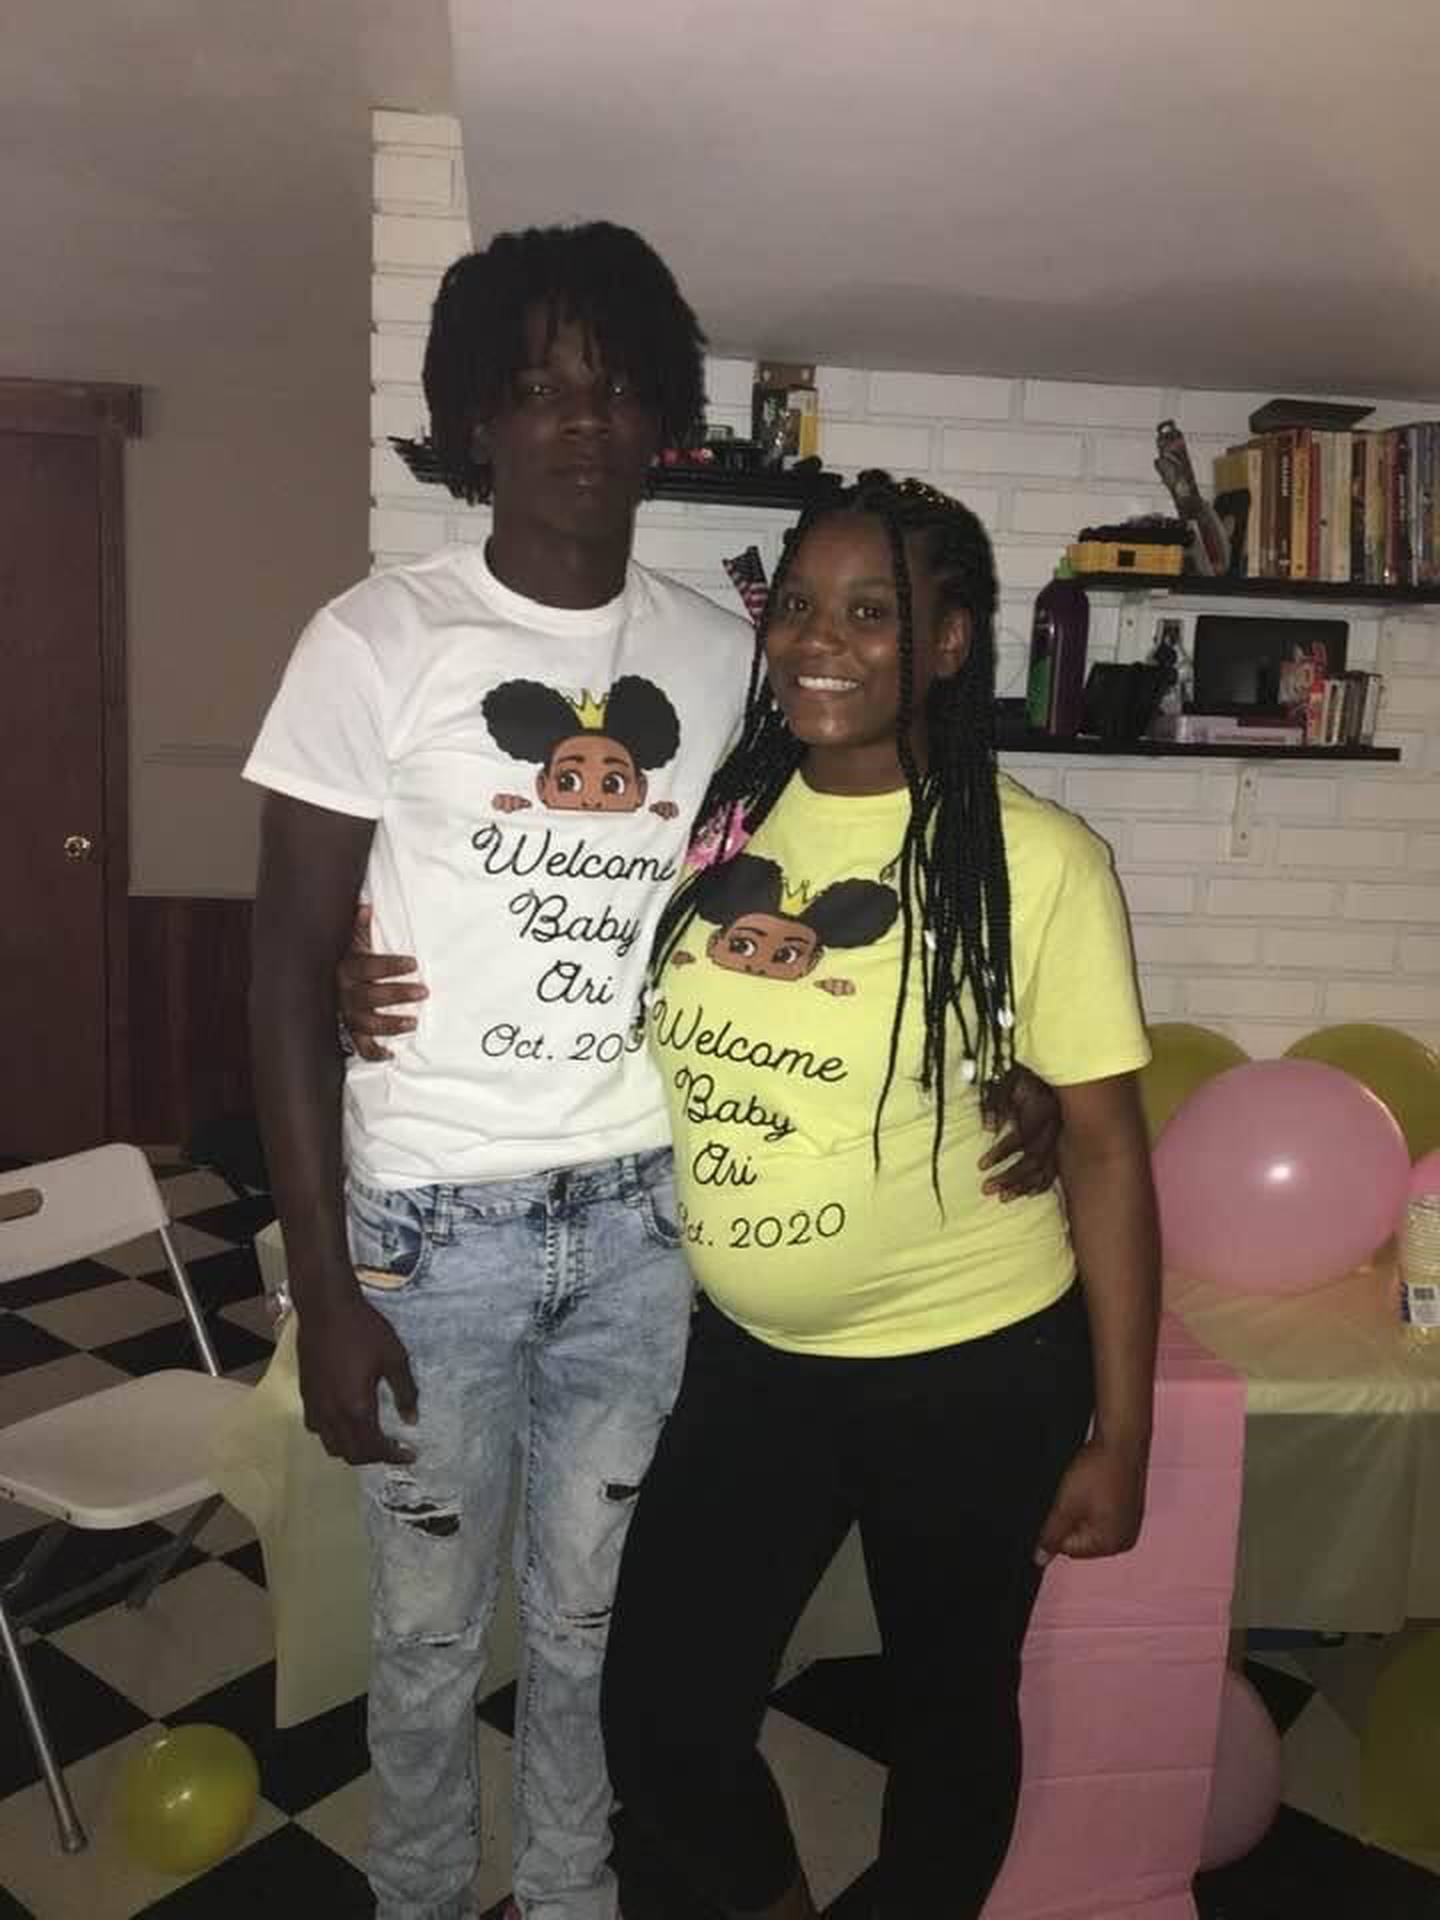 Marlon King Jr., a 2022 DeKalb High School graduate, stands with Tamiah Griffin, in 2020 as they prepare to welcome their baby Ari. King was fatally shot May 11, 2023 in DeKalb. Two men, Jayden C. Hernandez and Carreon S. Scott, also of DeKalb, are charged with first-degree murder in his death.